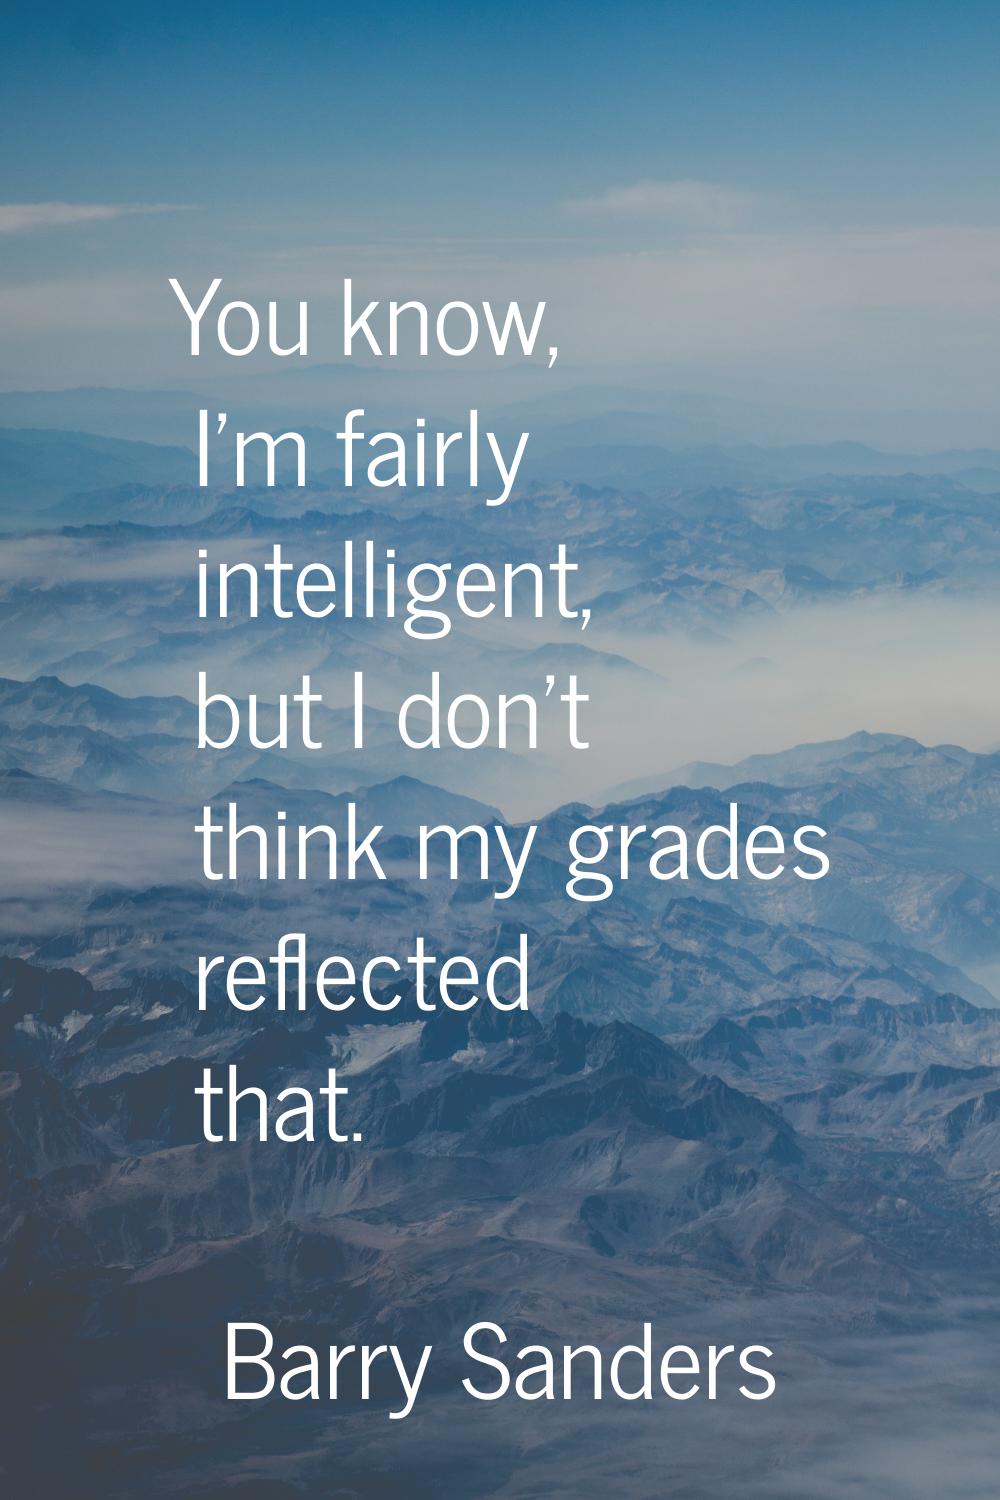 You know, I'm fairly intelligent, but I don't think my grades reflected that.